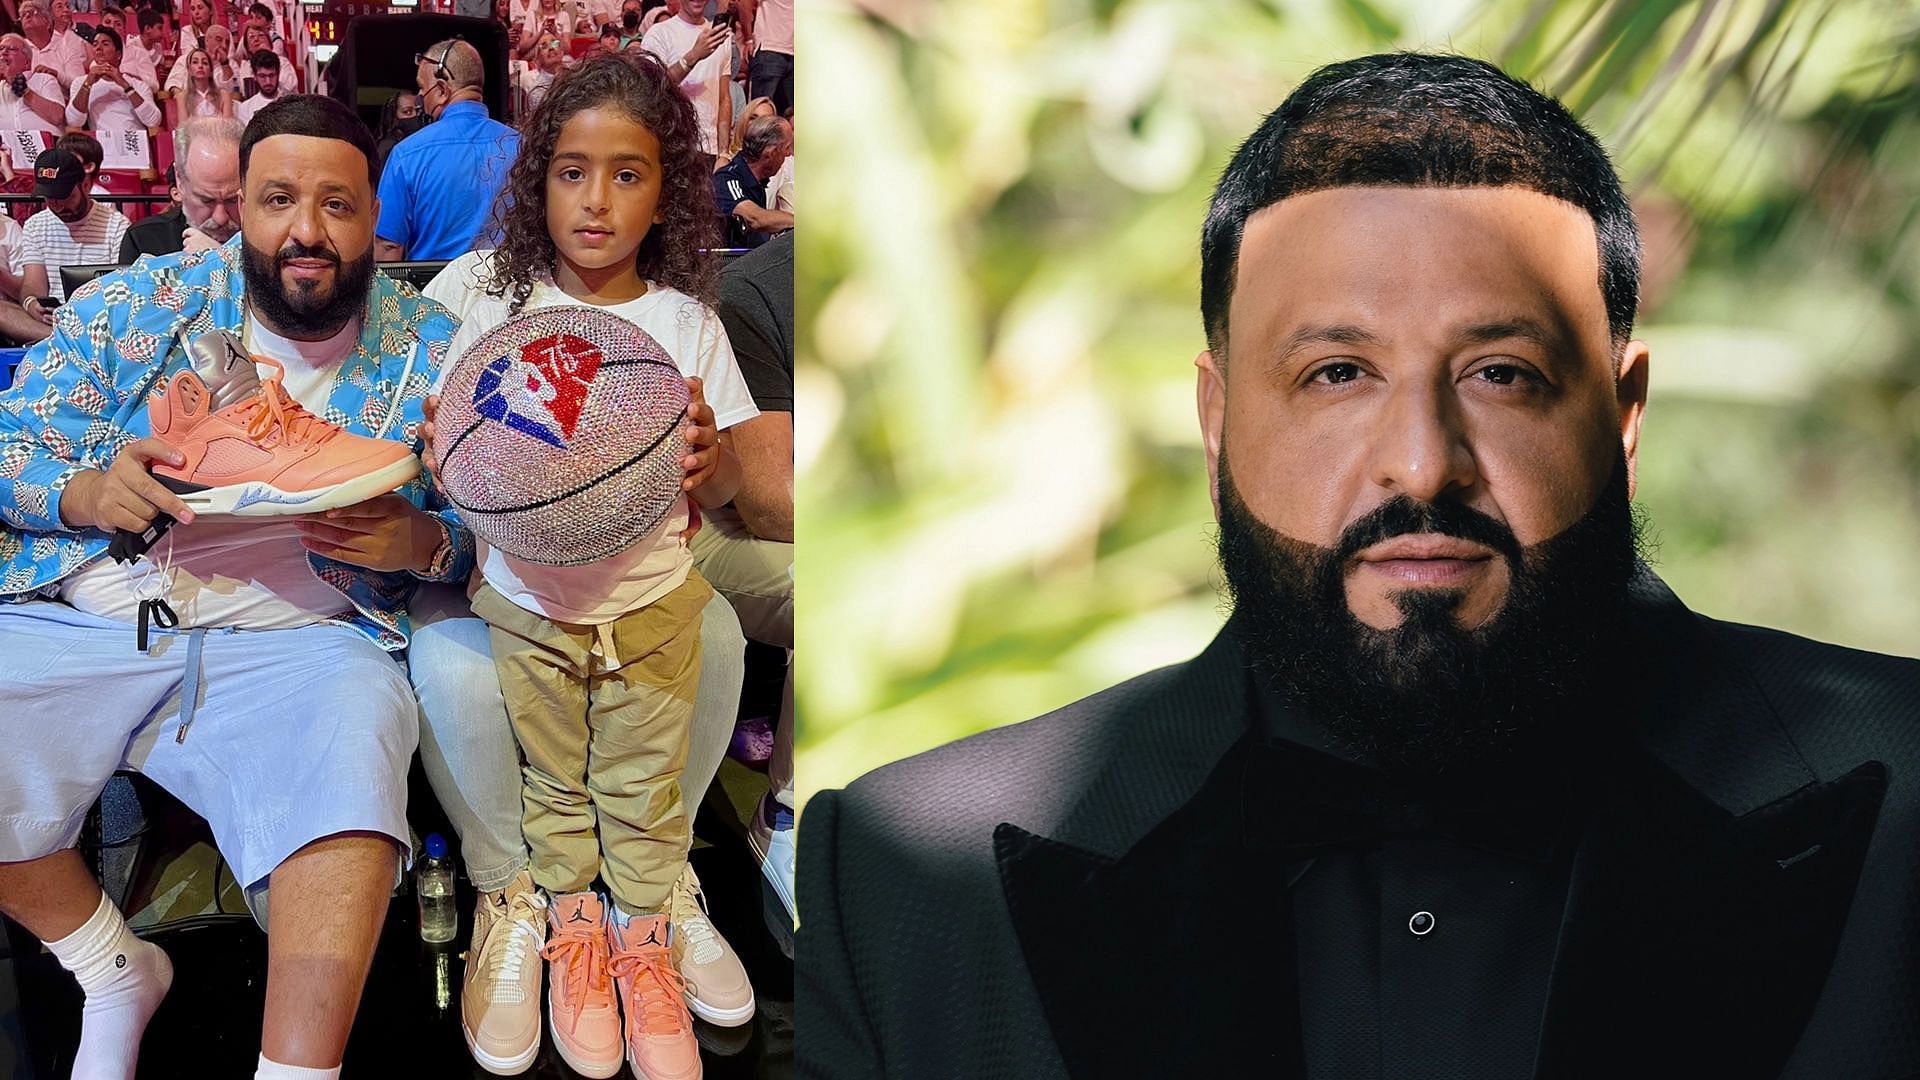 Did they carry him to his seat?: DJ Khaled memes trend after